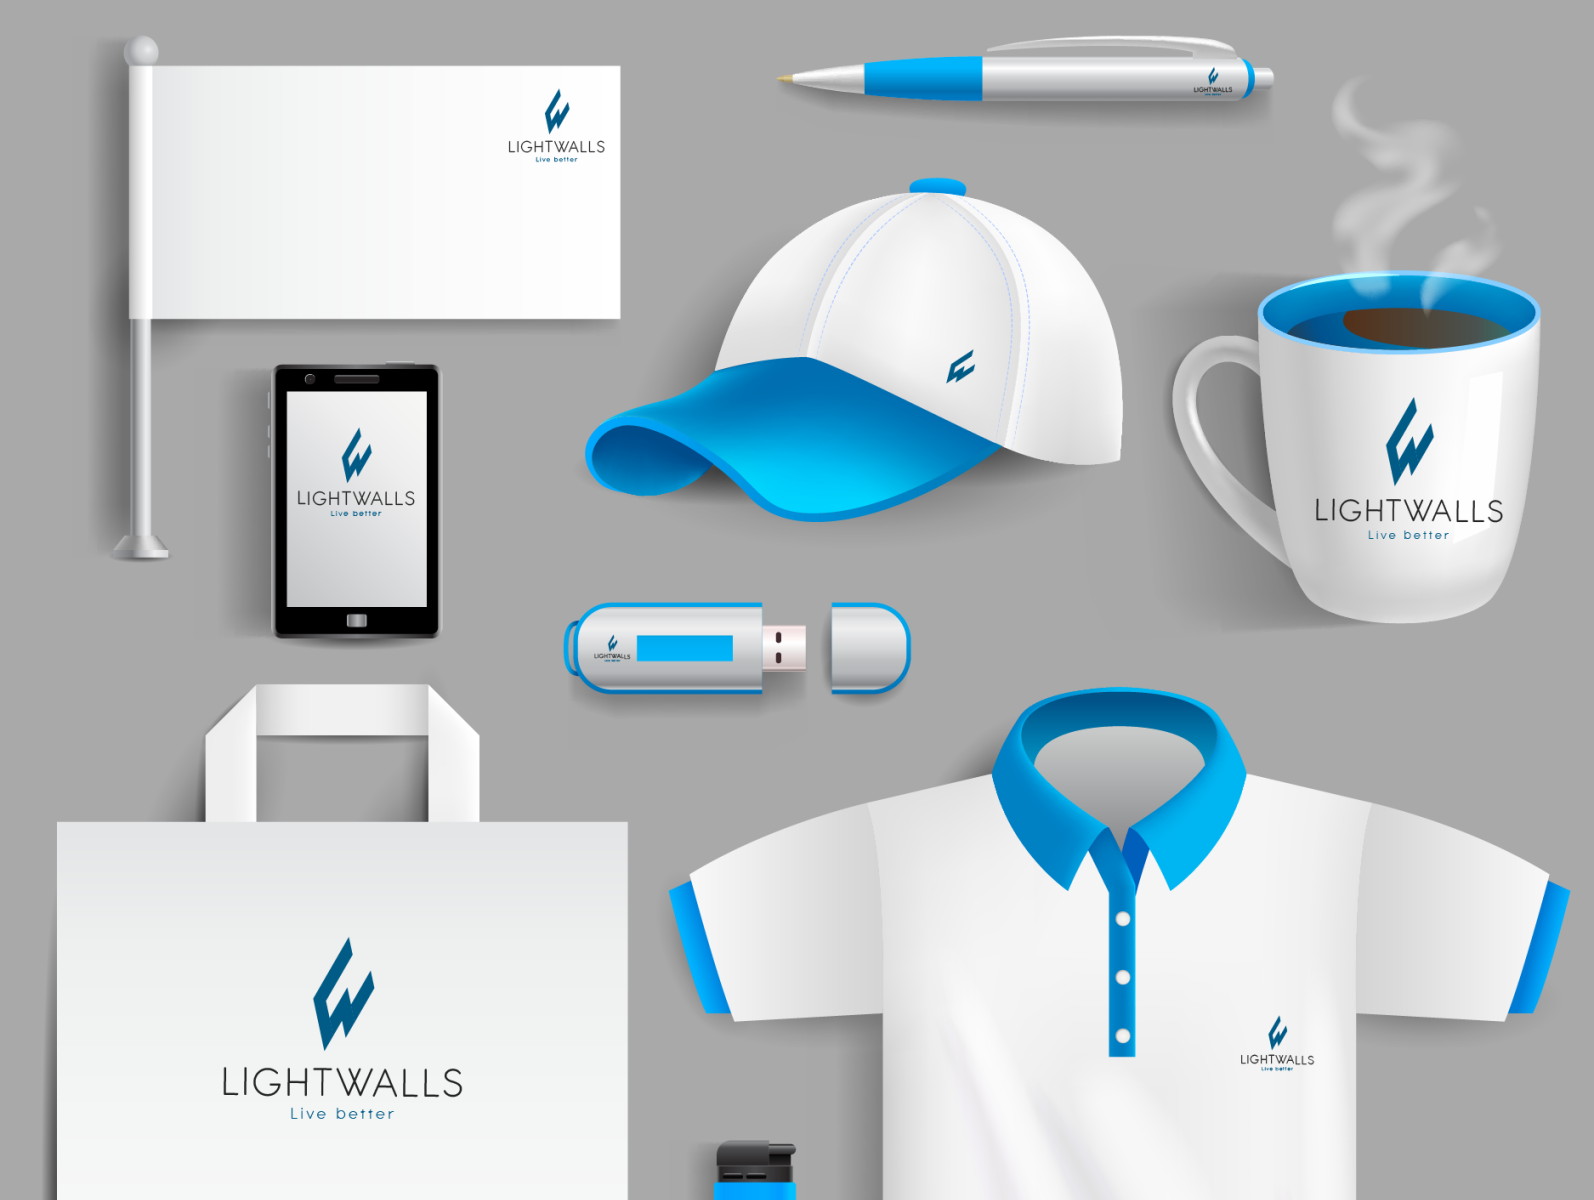 lightwall branding by Onwe Moses on Dribbble